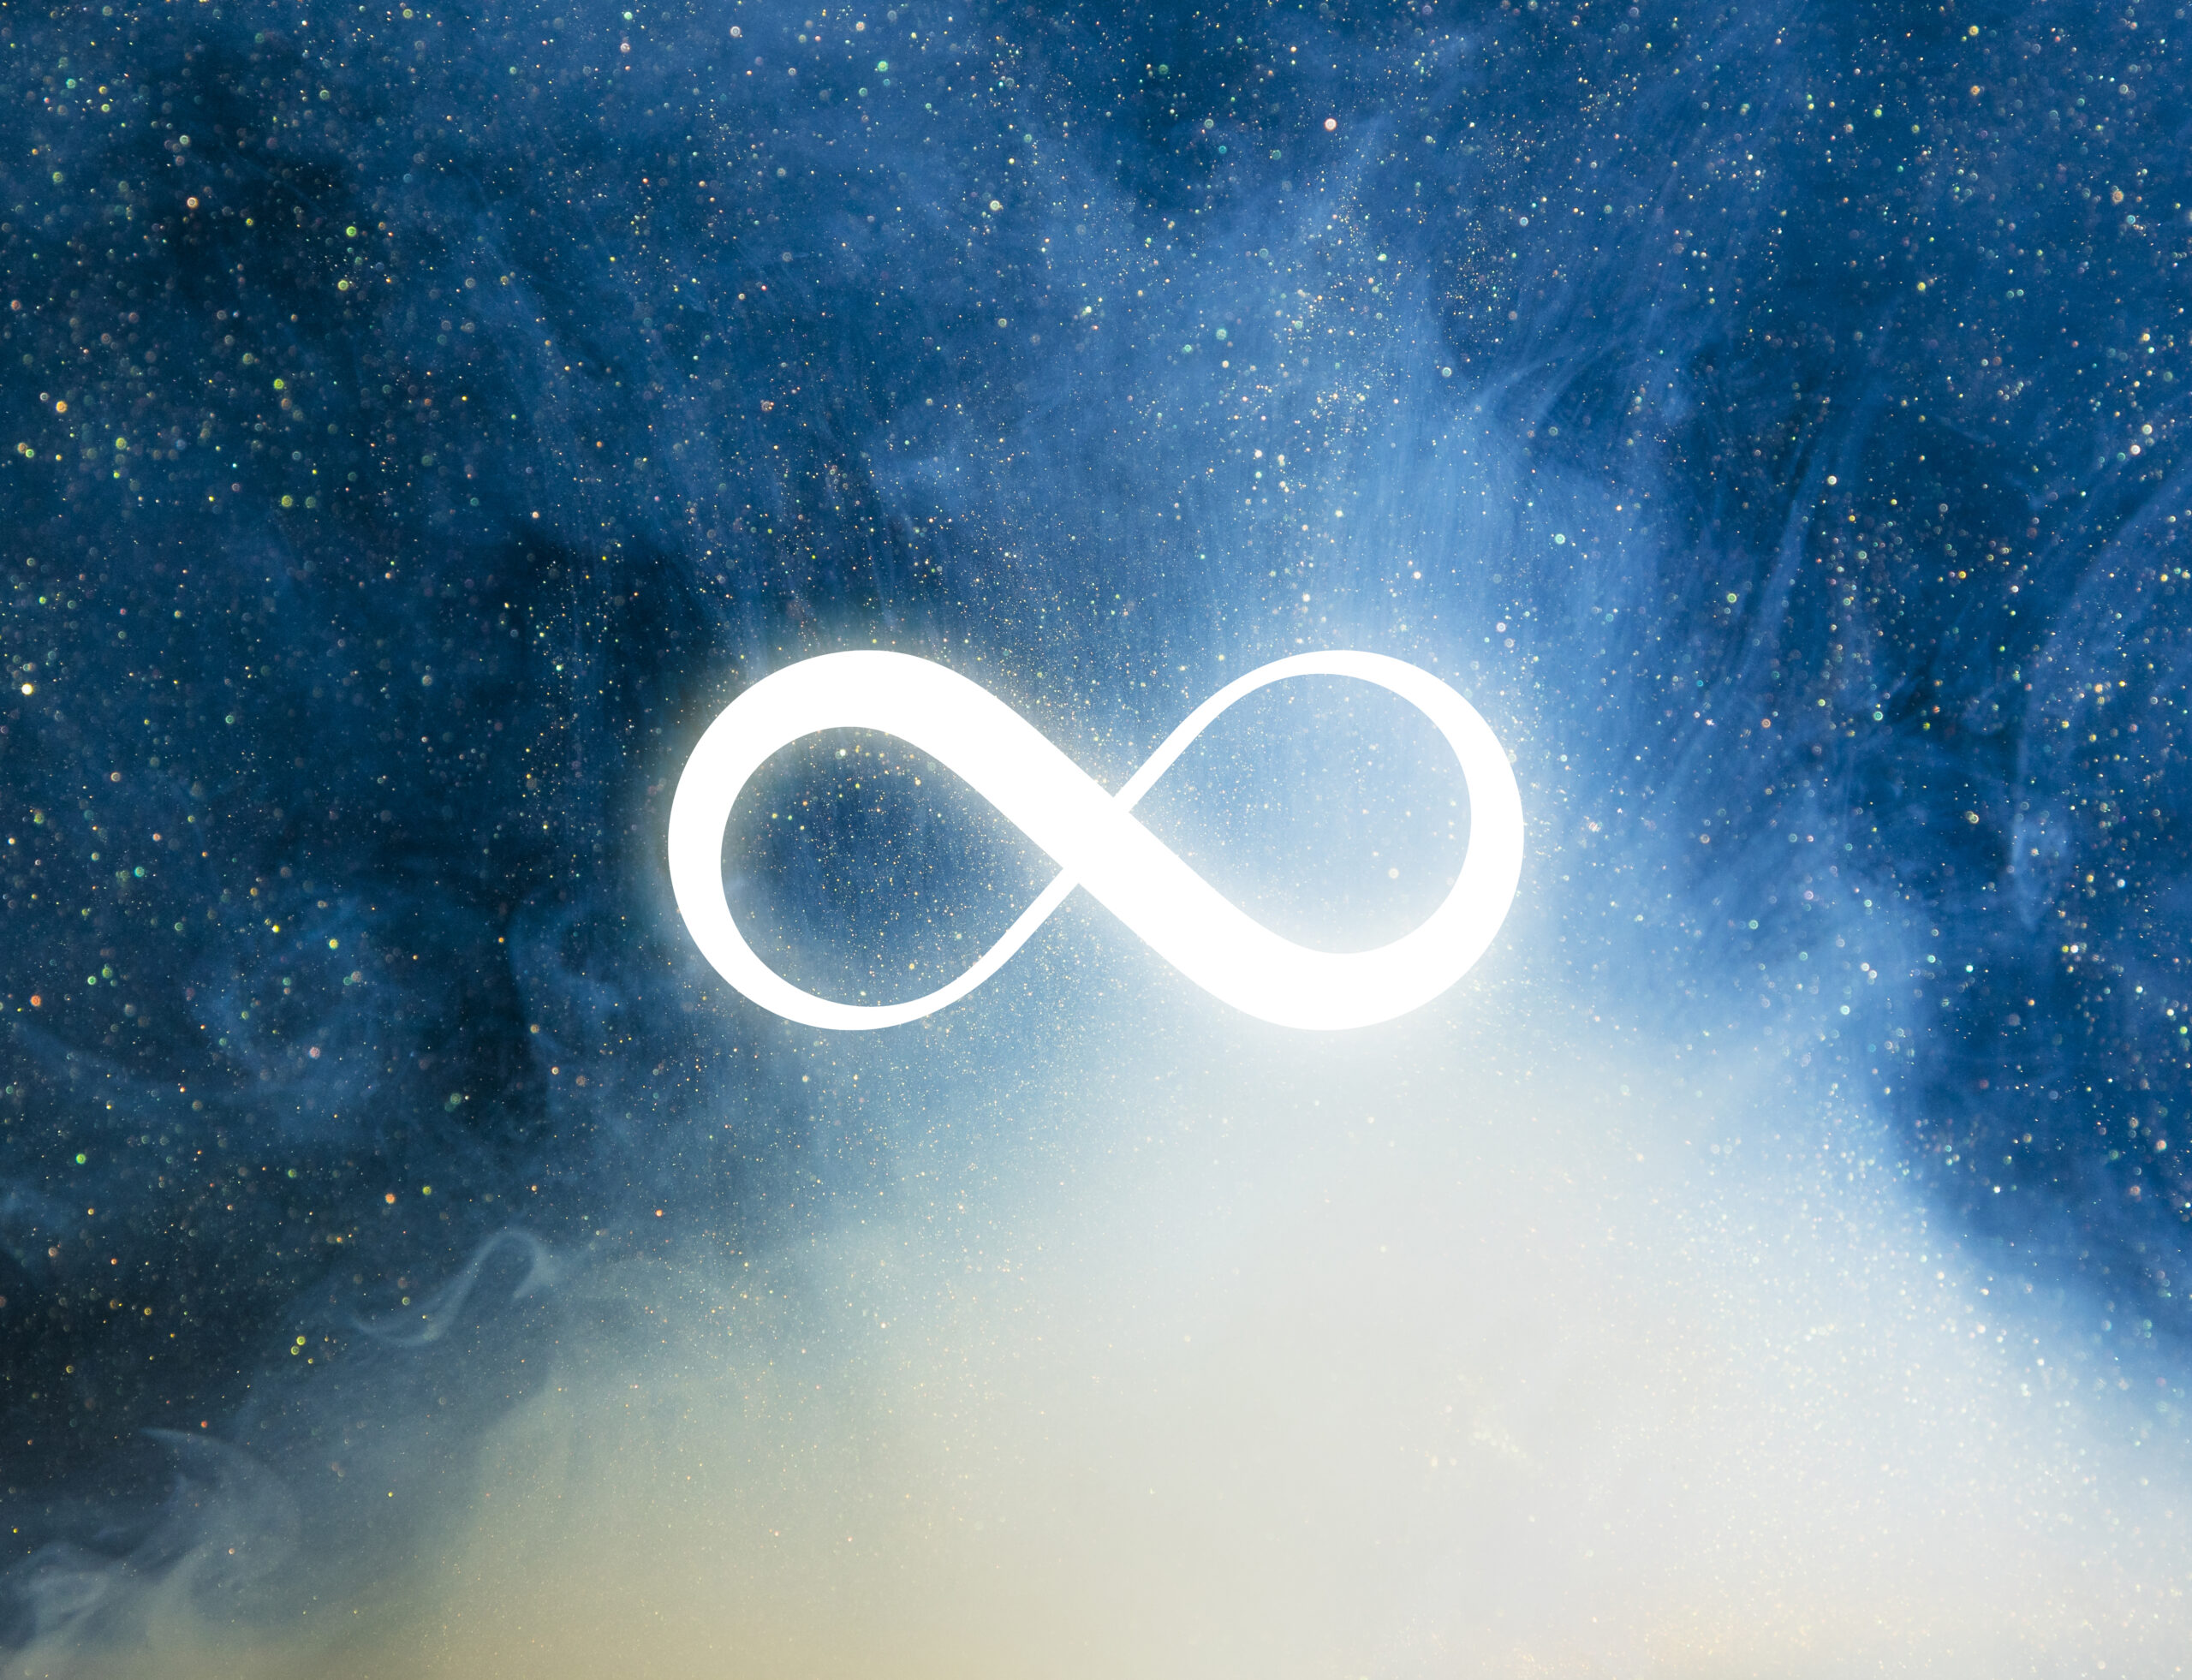 infinity symbol over an abstract blue background